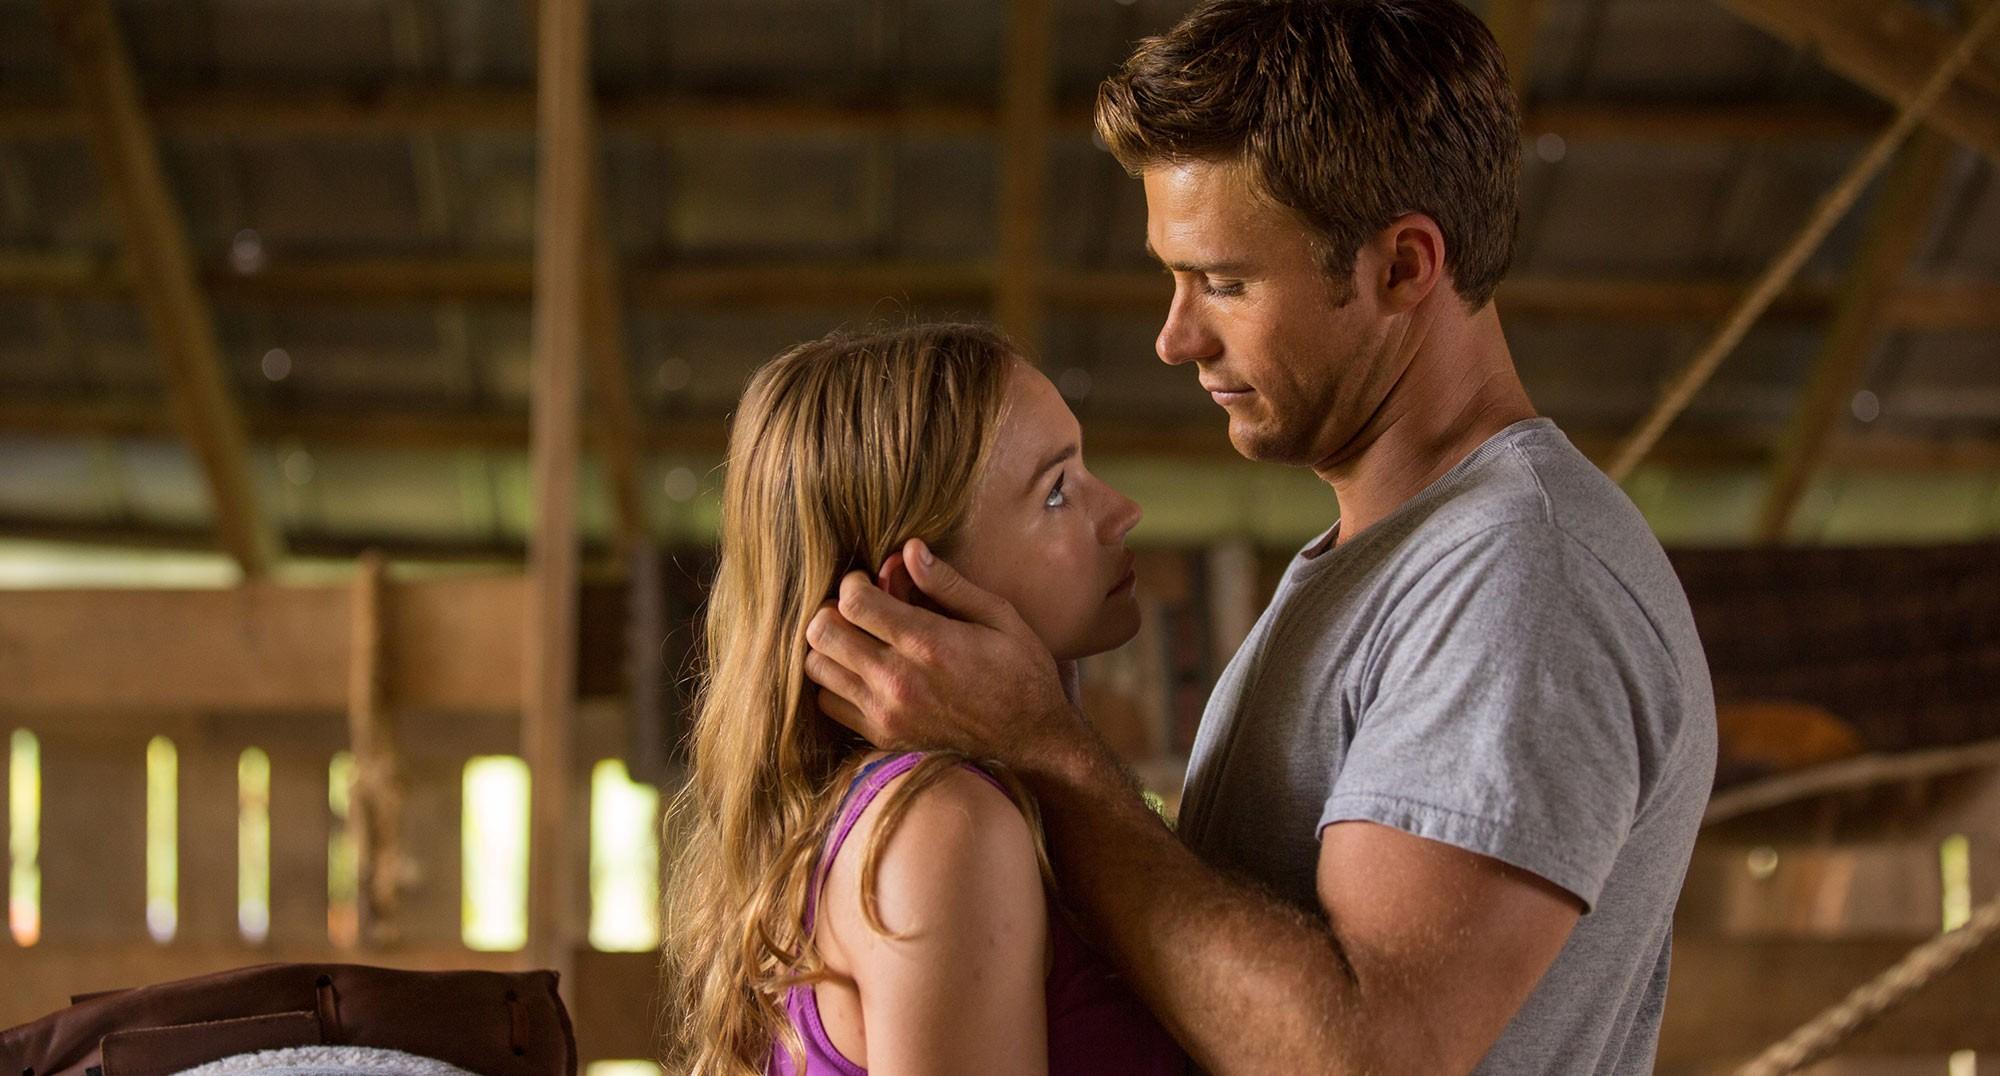 Review: New Nicholas Sparks romance puts a twist on classic love story